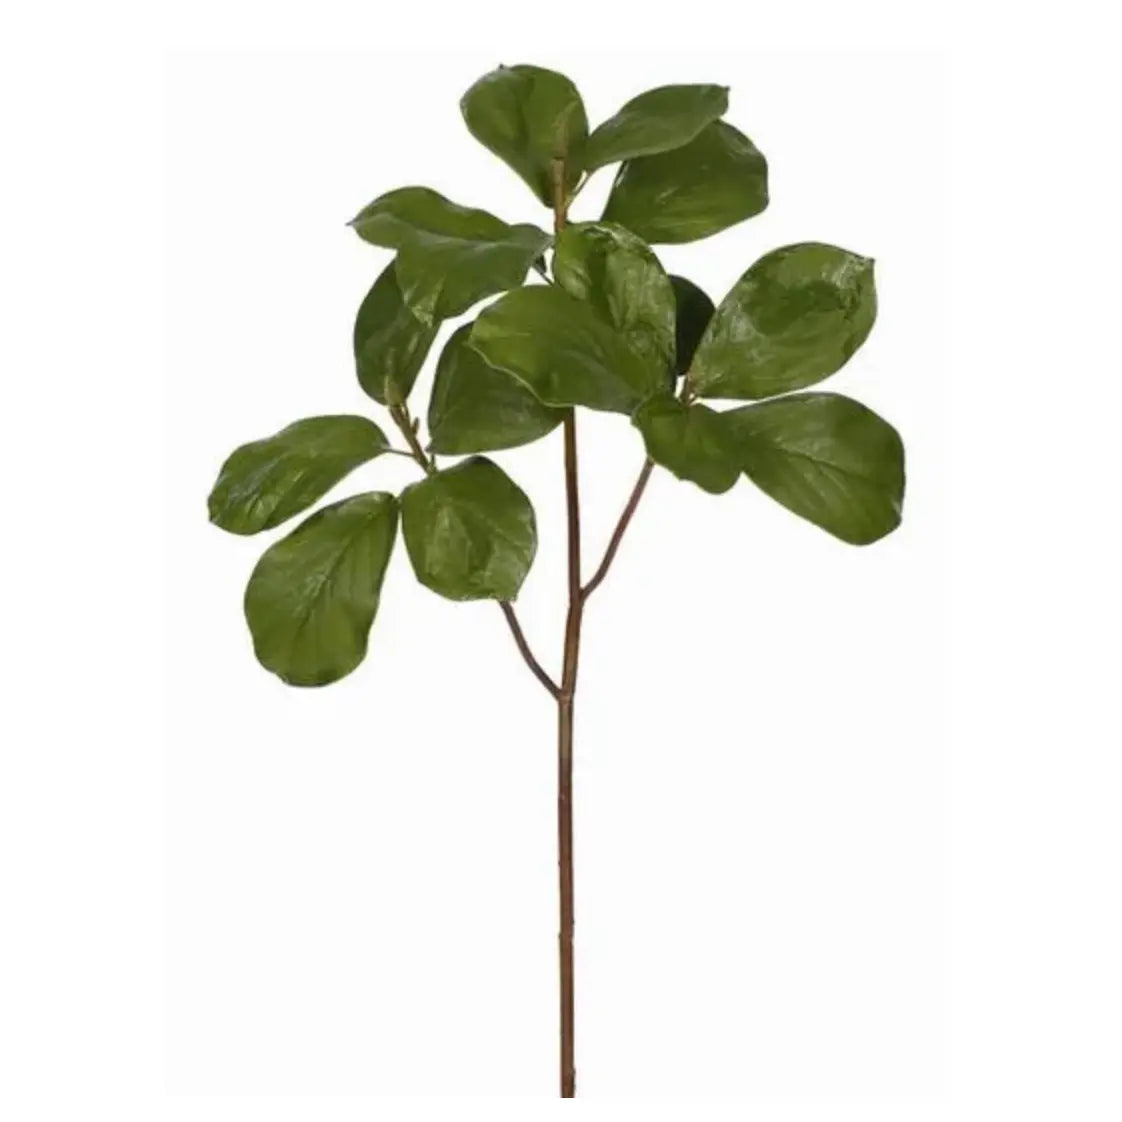 Home Smith Magnolia Tree Leaf Branch Winward Stems, Blooms & Branches